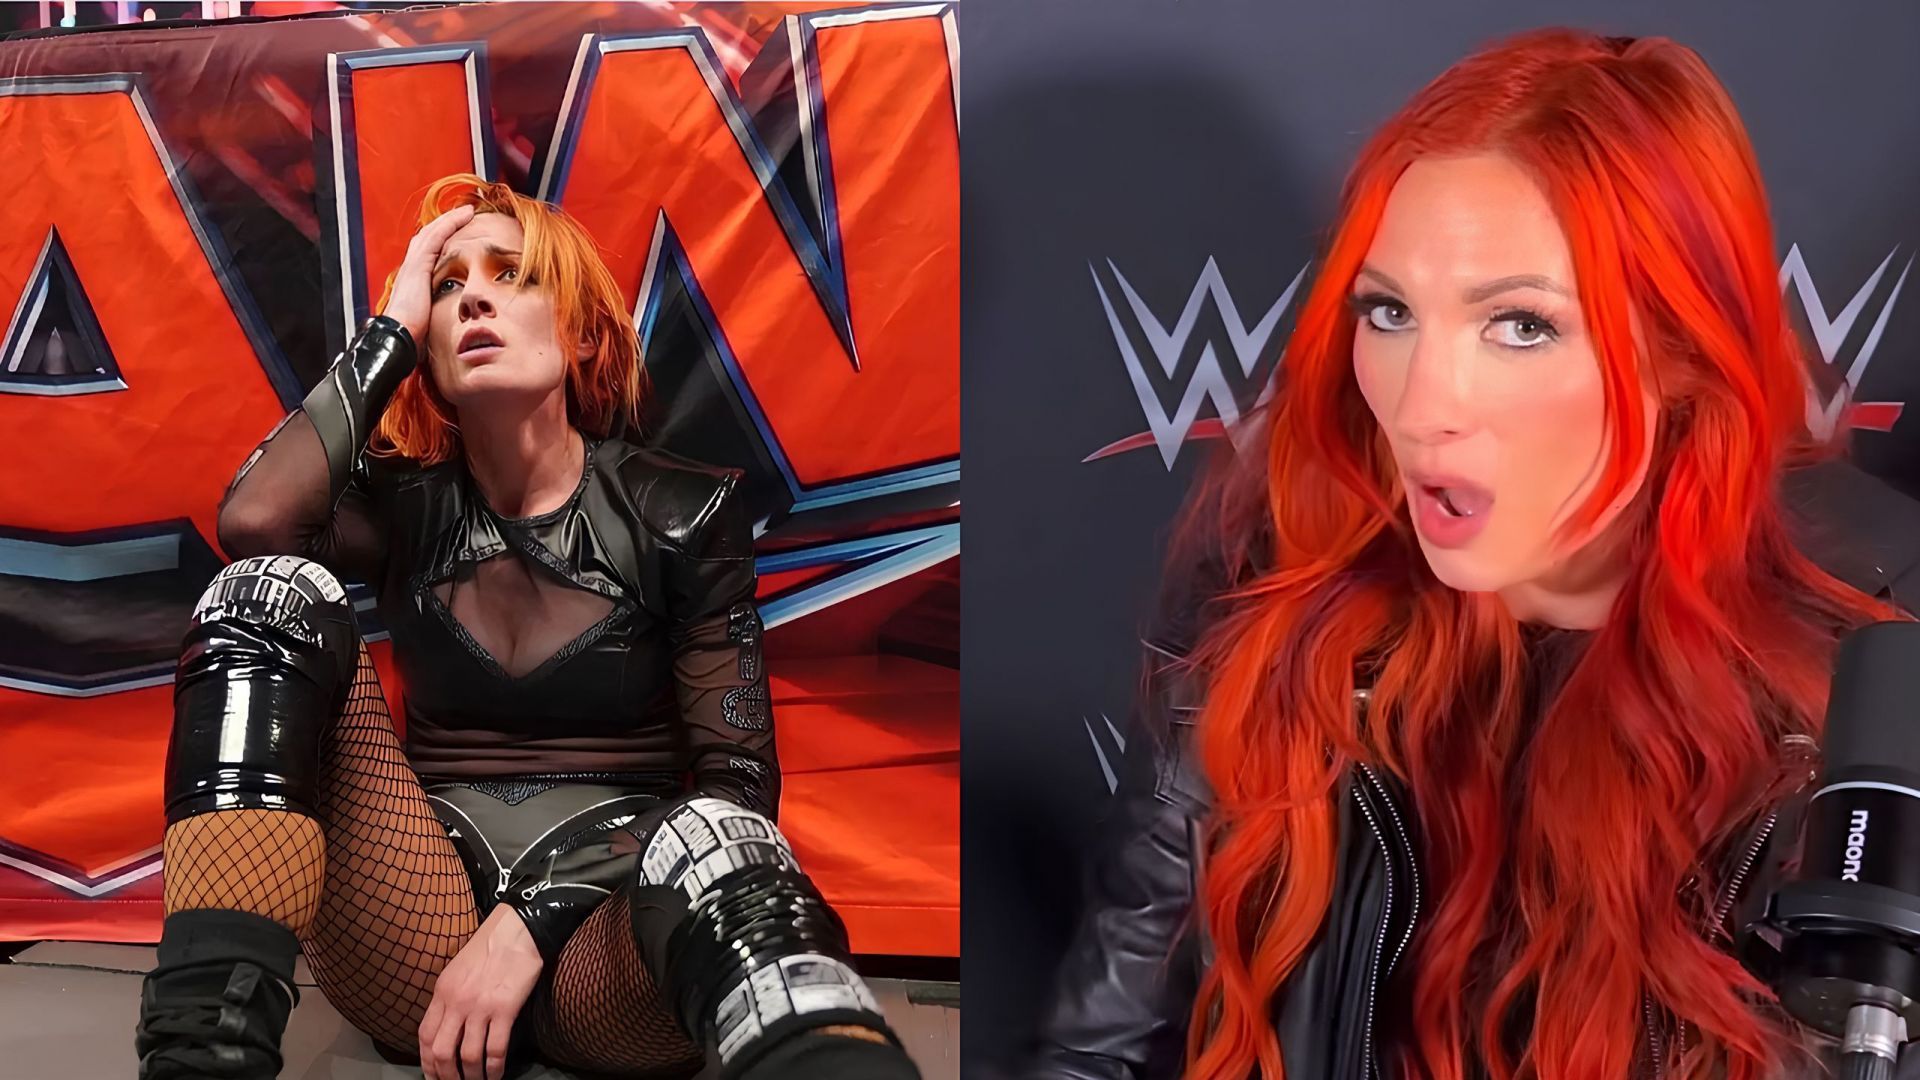 Becky Lynch is currently drafted on RAW